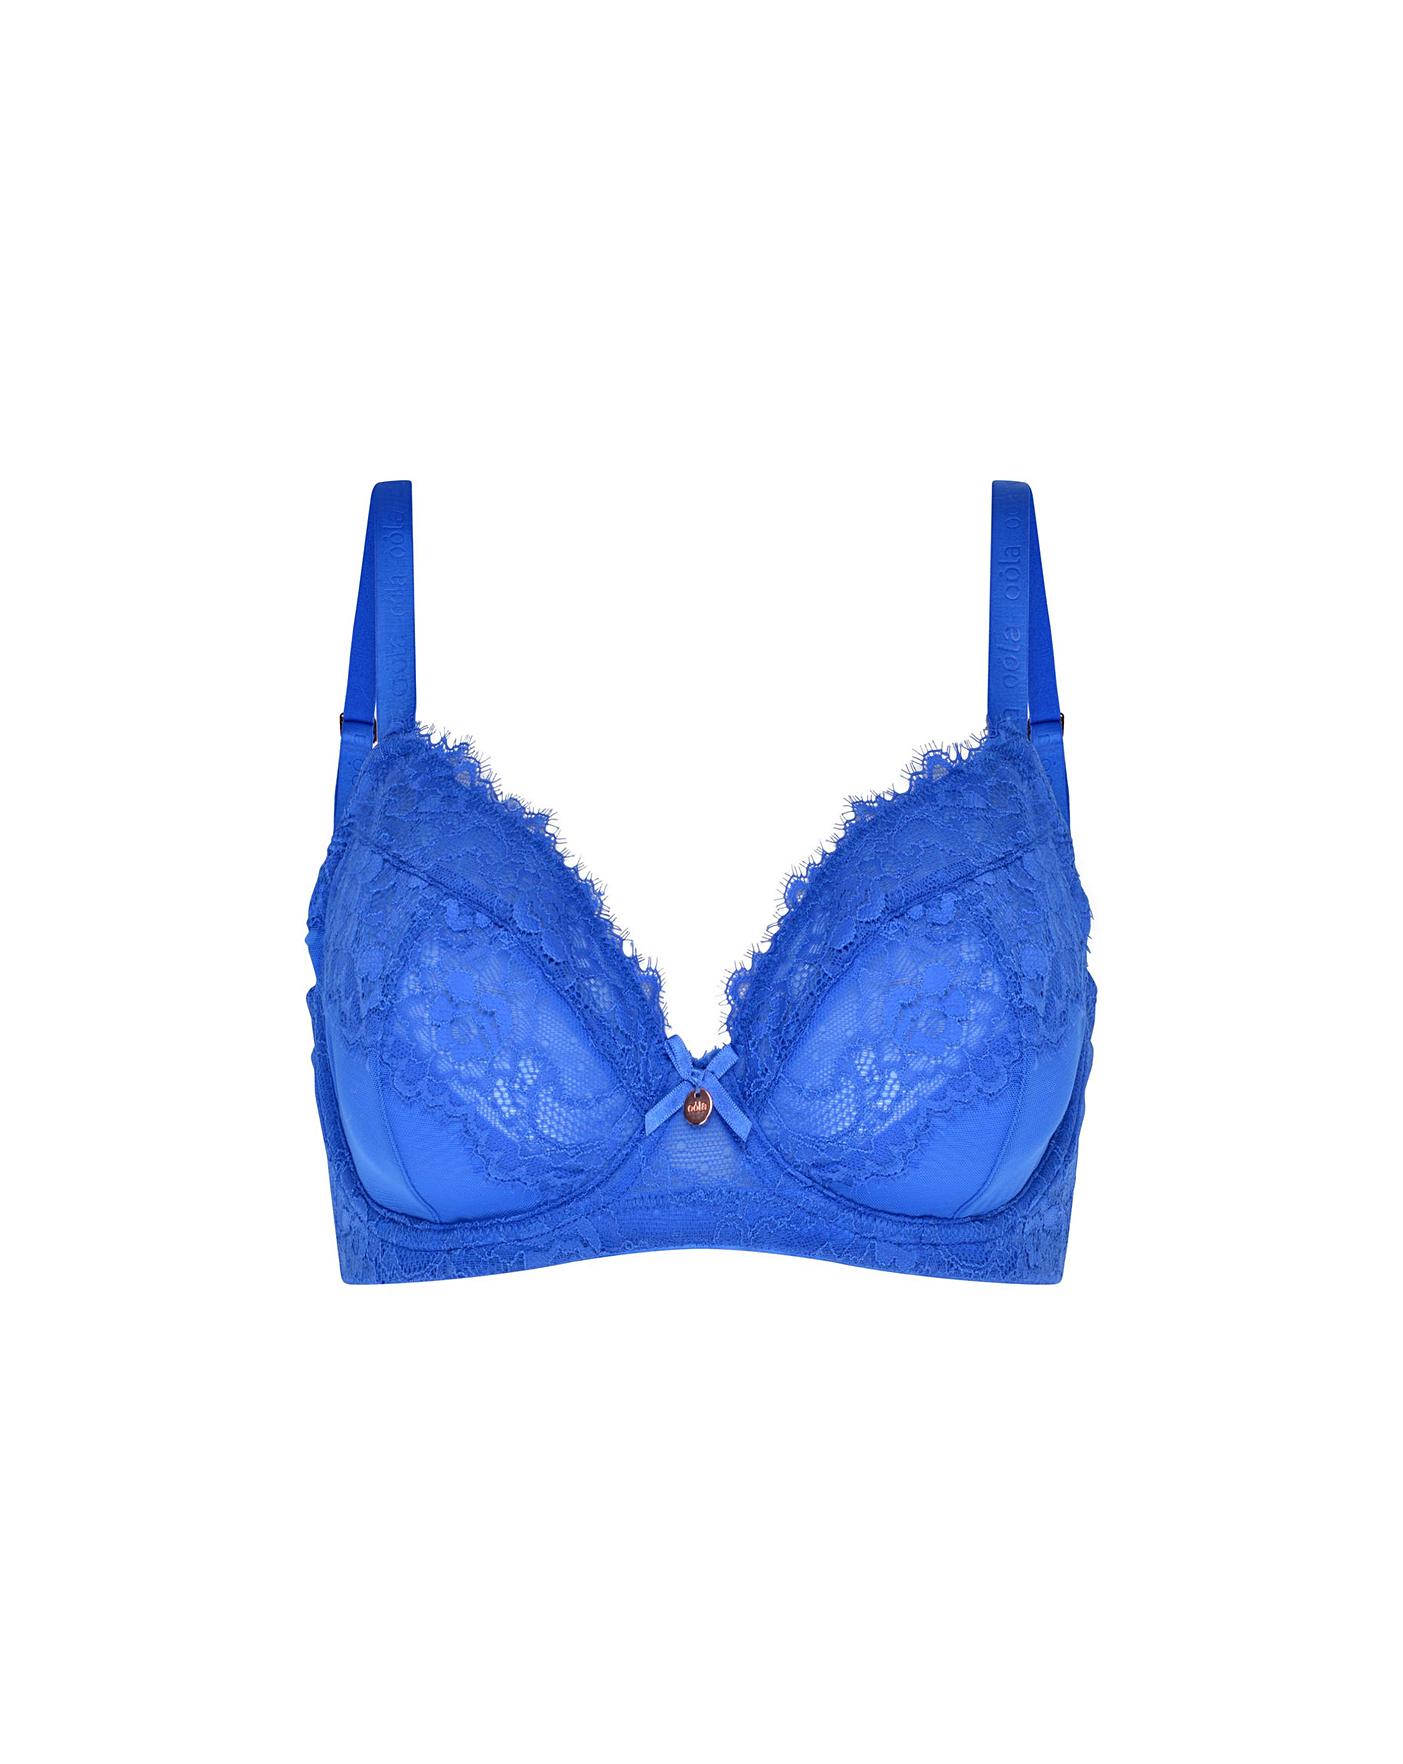 Buy OOLA LINGERIE Lace & Logo Non Wired Soft Bra 46D, Bras